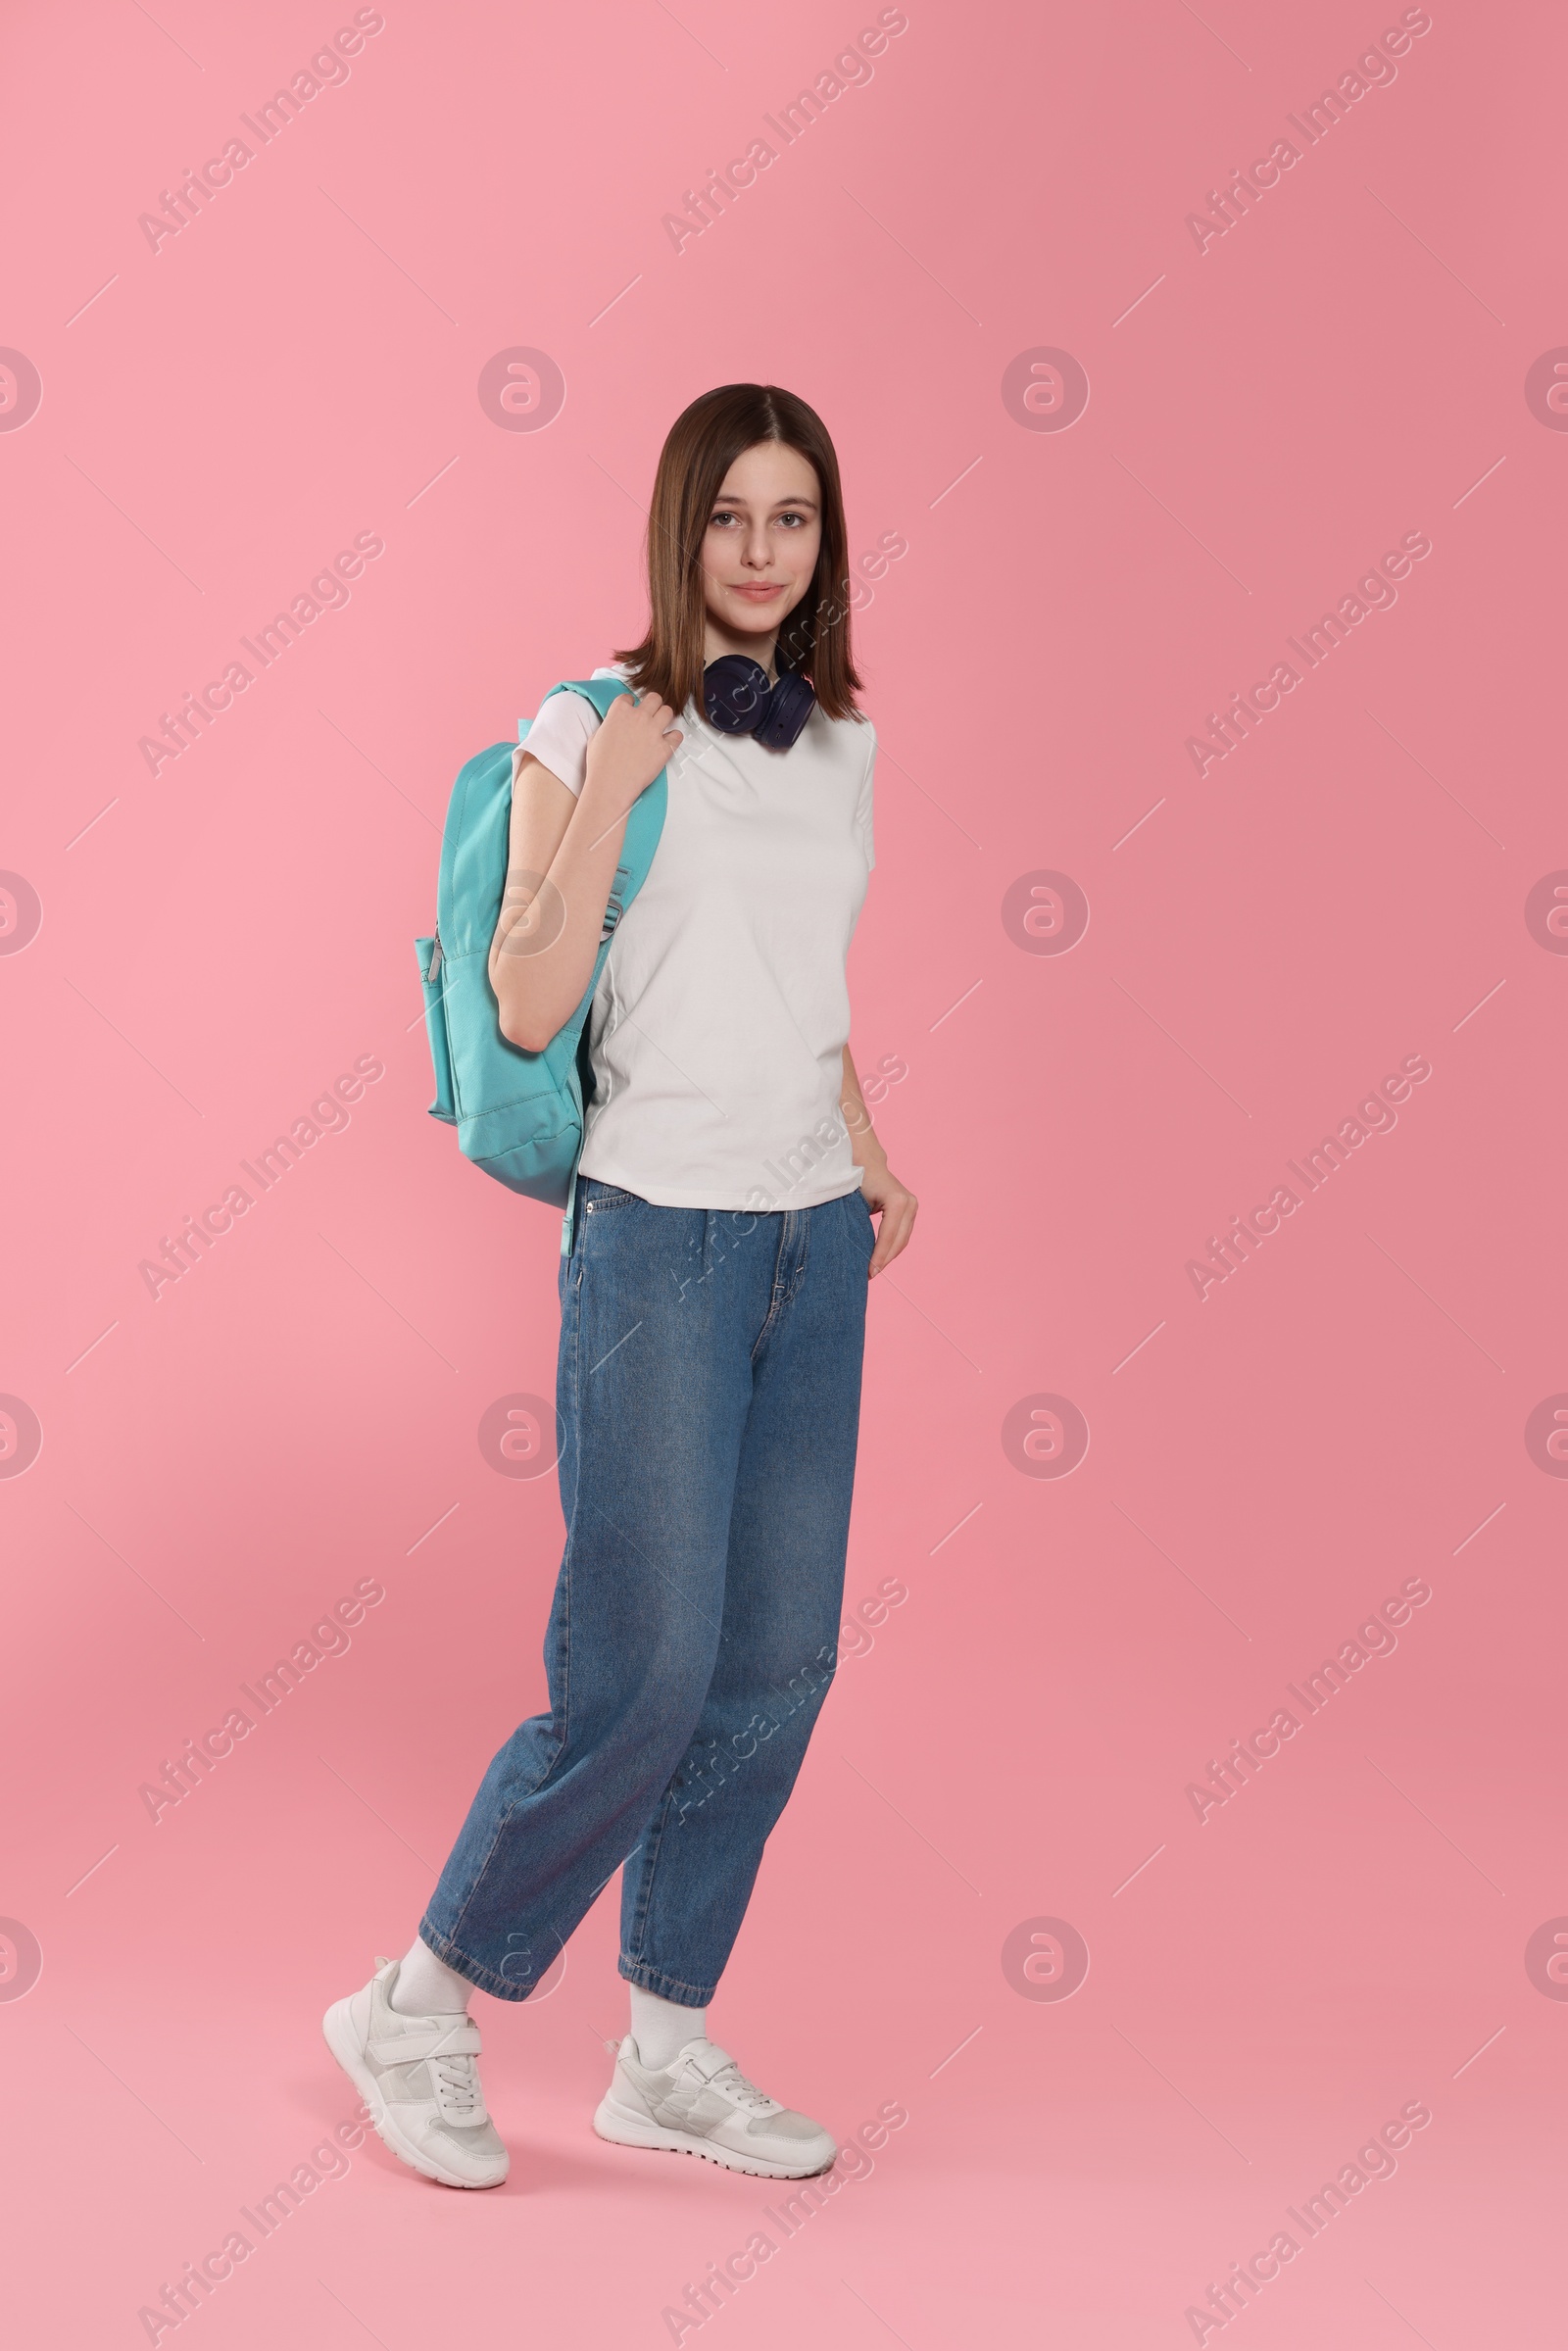 Photo of Cute teenage girl with headphones and backpack on pink background